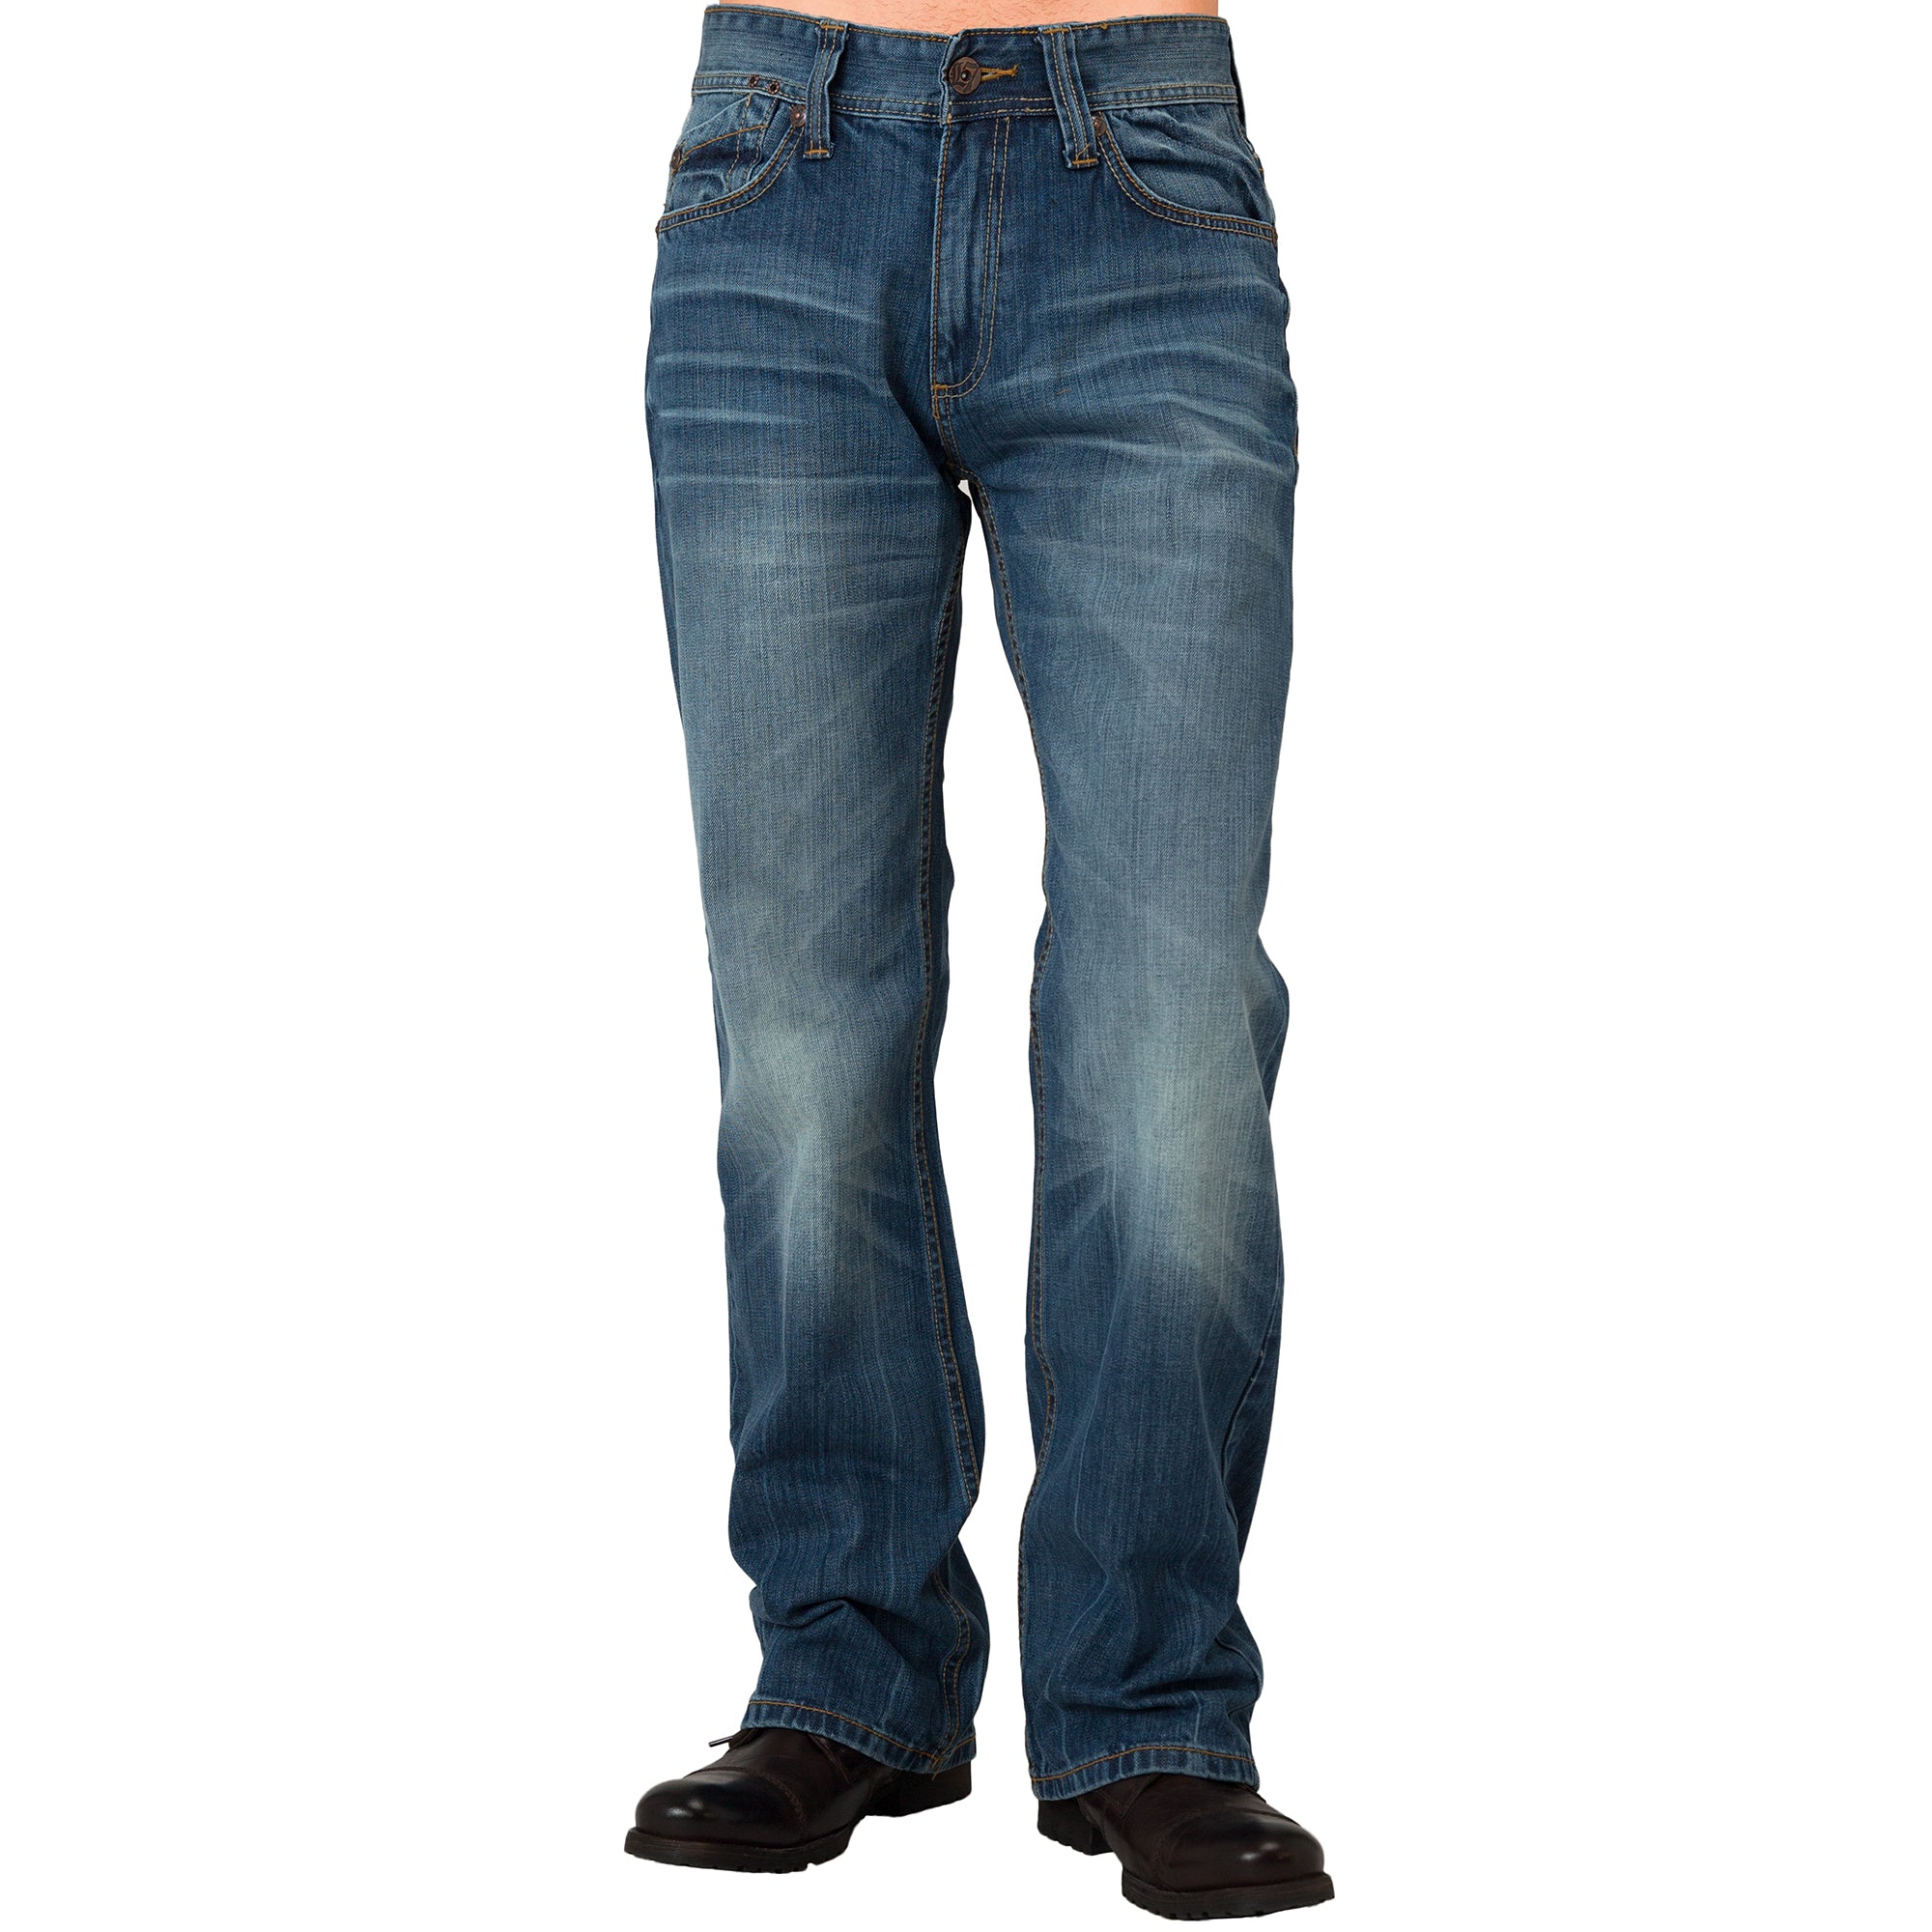 Relaxed 5 7 Level 7 Level Bootcut Distressed Vintage Jeans – Men\'s Premium Pocket Jeans Midrise